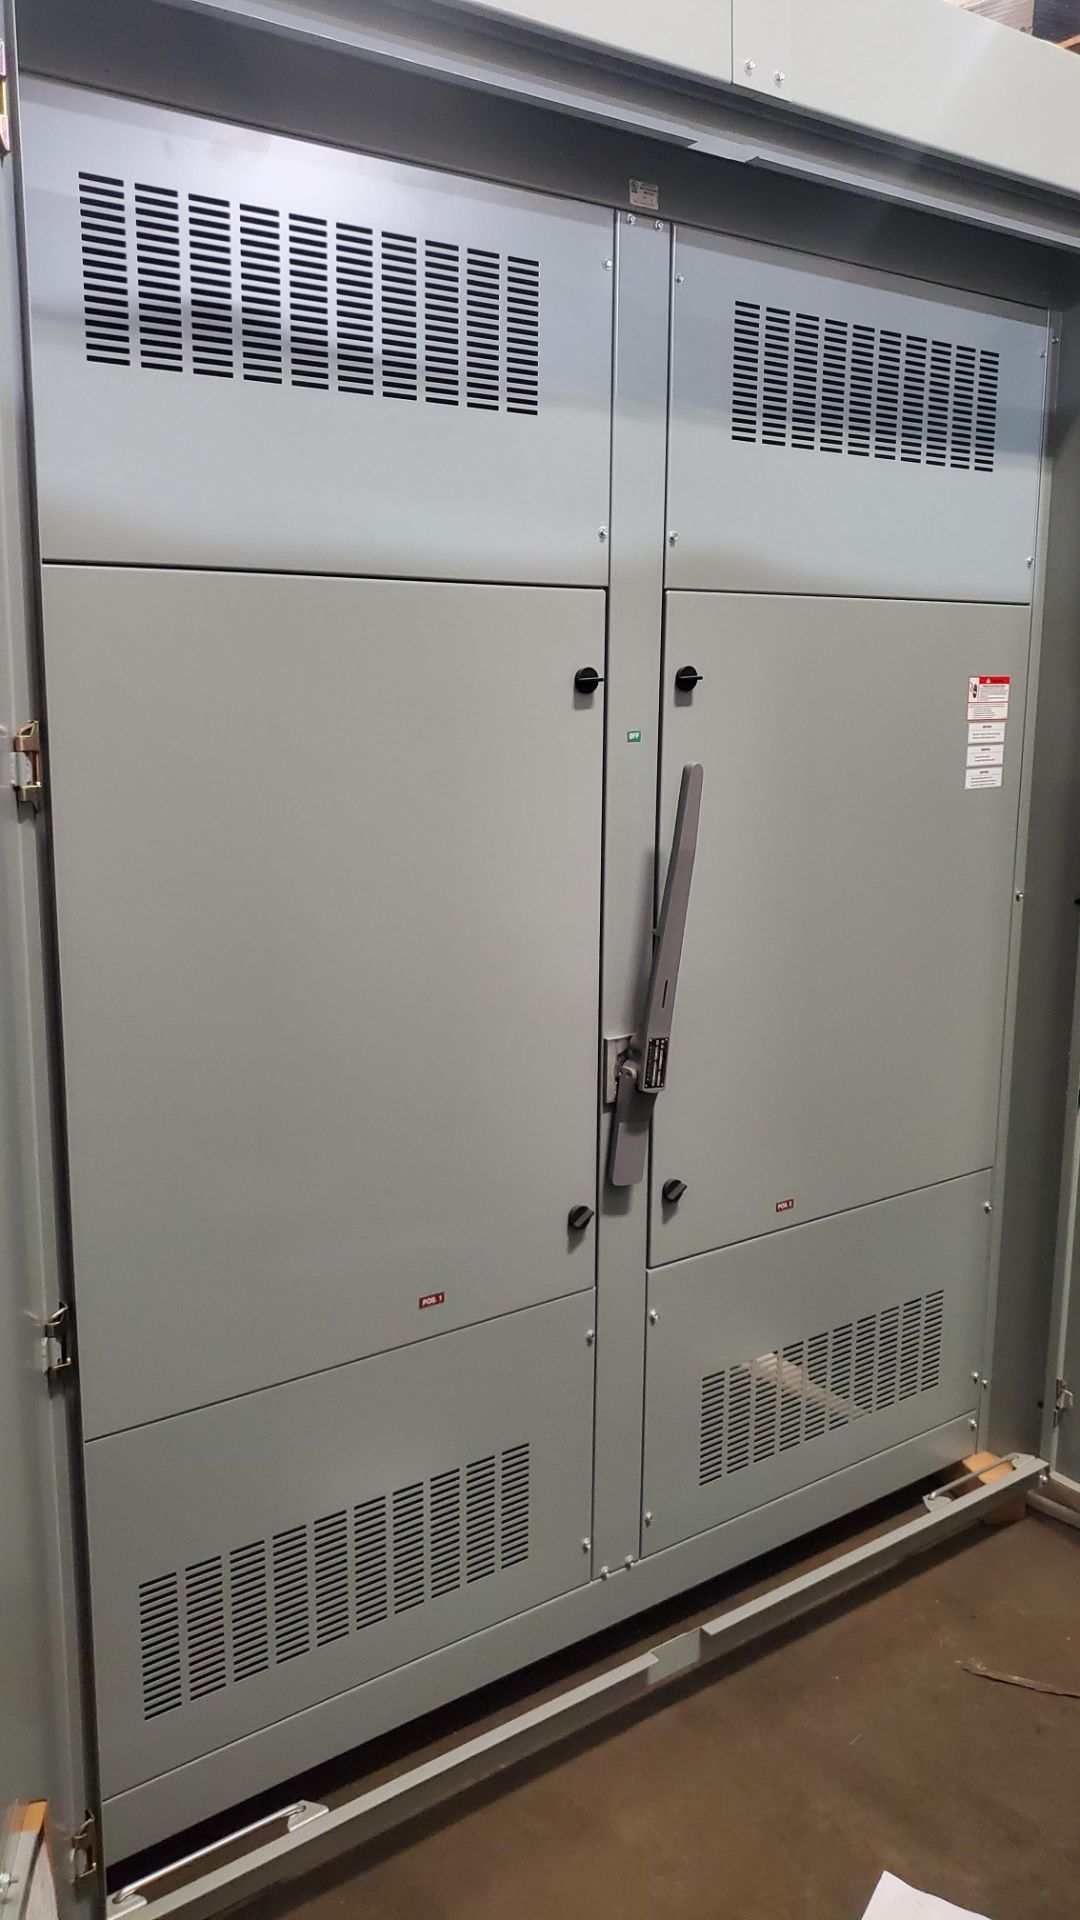 PCT Cat SL3613 Manual Transfer Switch 4000 Amp, 3 PH, 4 Wire (LOADING FEES: $200) - Image 2 of 3